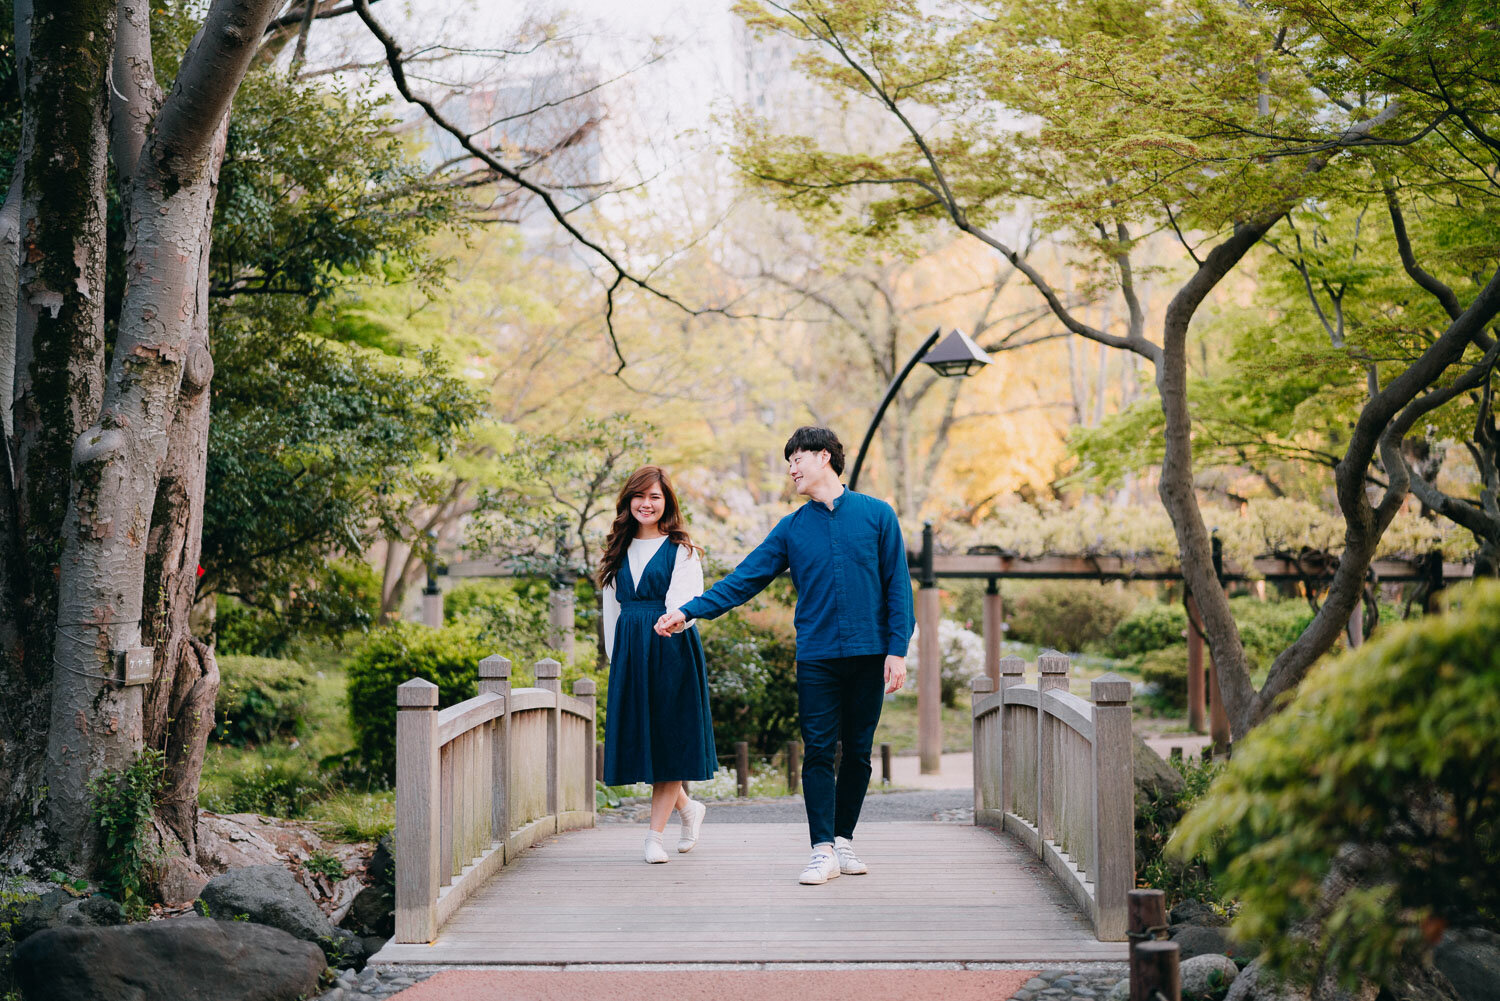 Couples photoshoot in traditional Japanese Garden, Tokyo